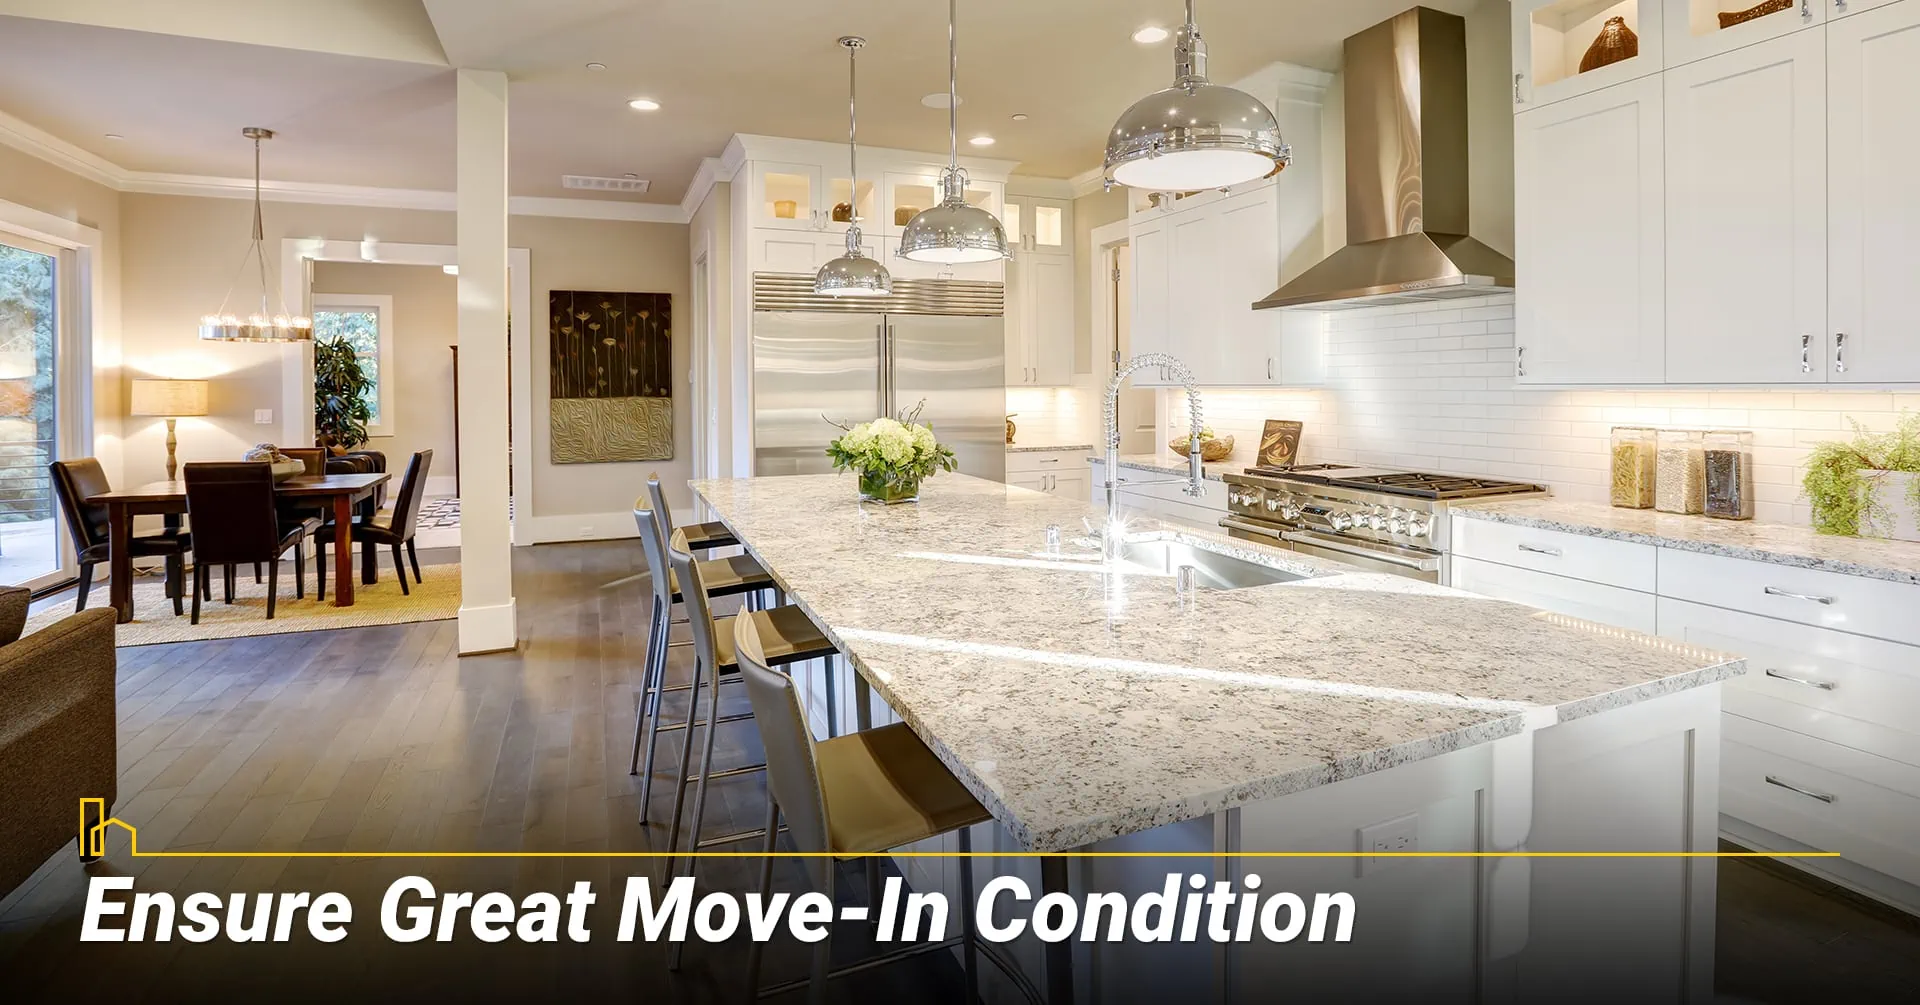 Ensure Great Move-In Condition